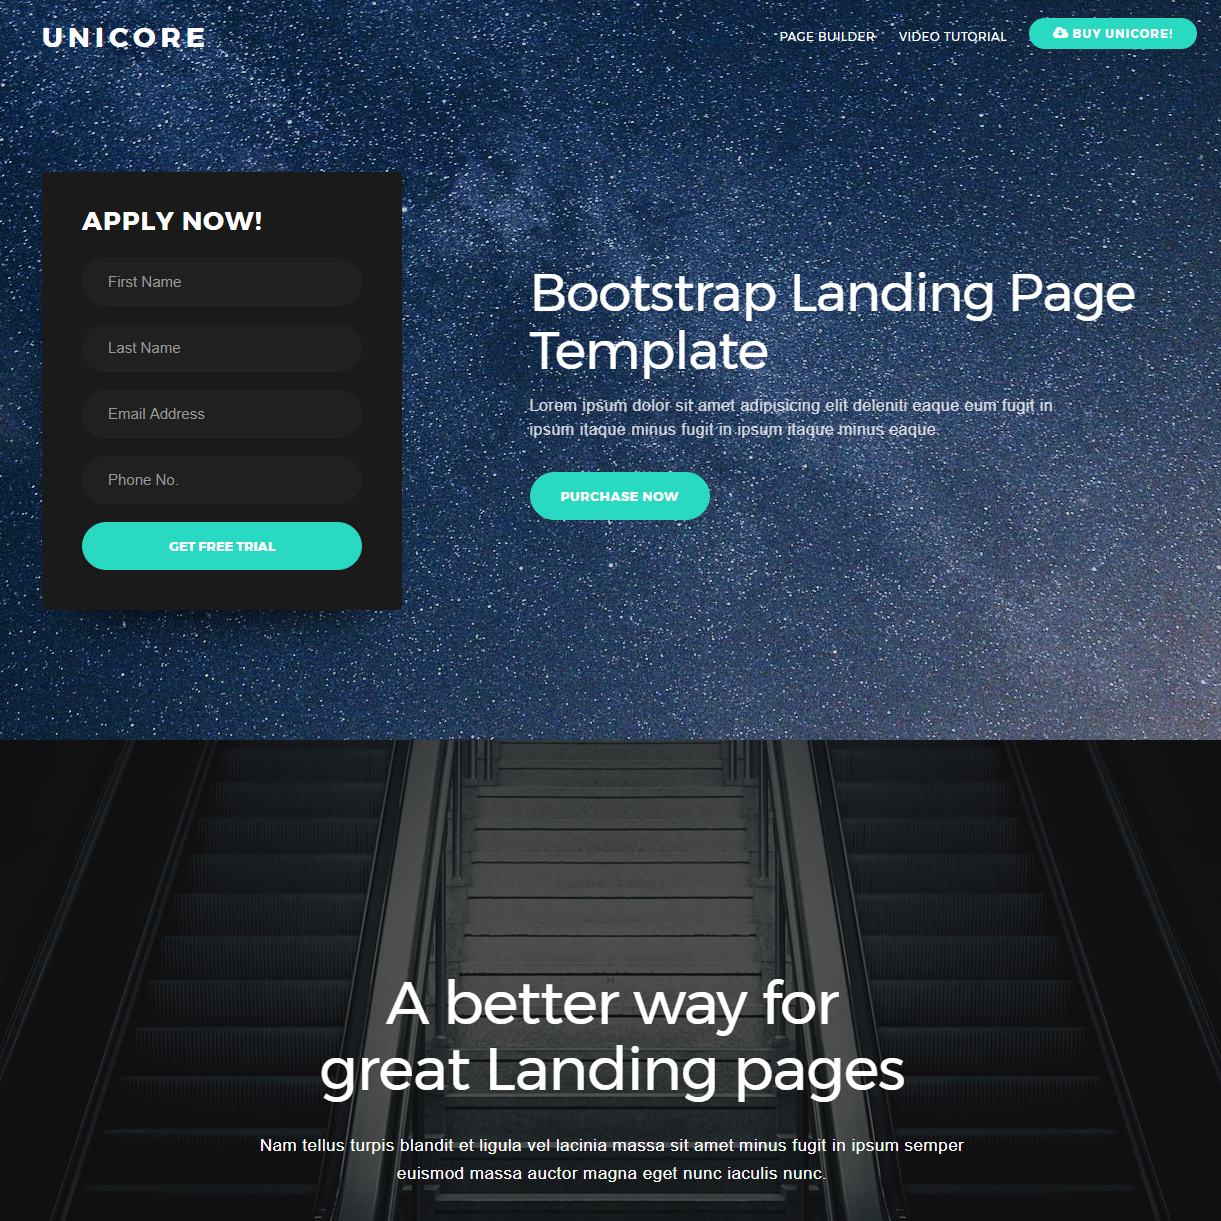 Responsive Bootstrap One Page Themes